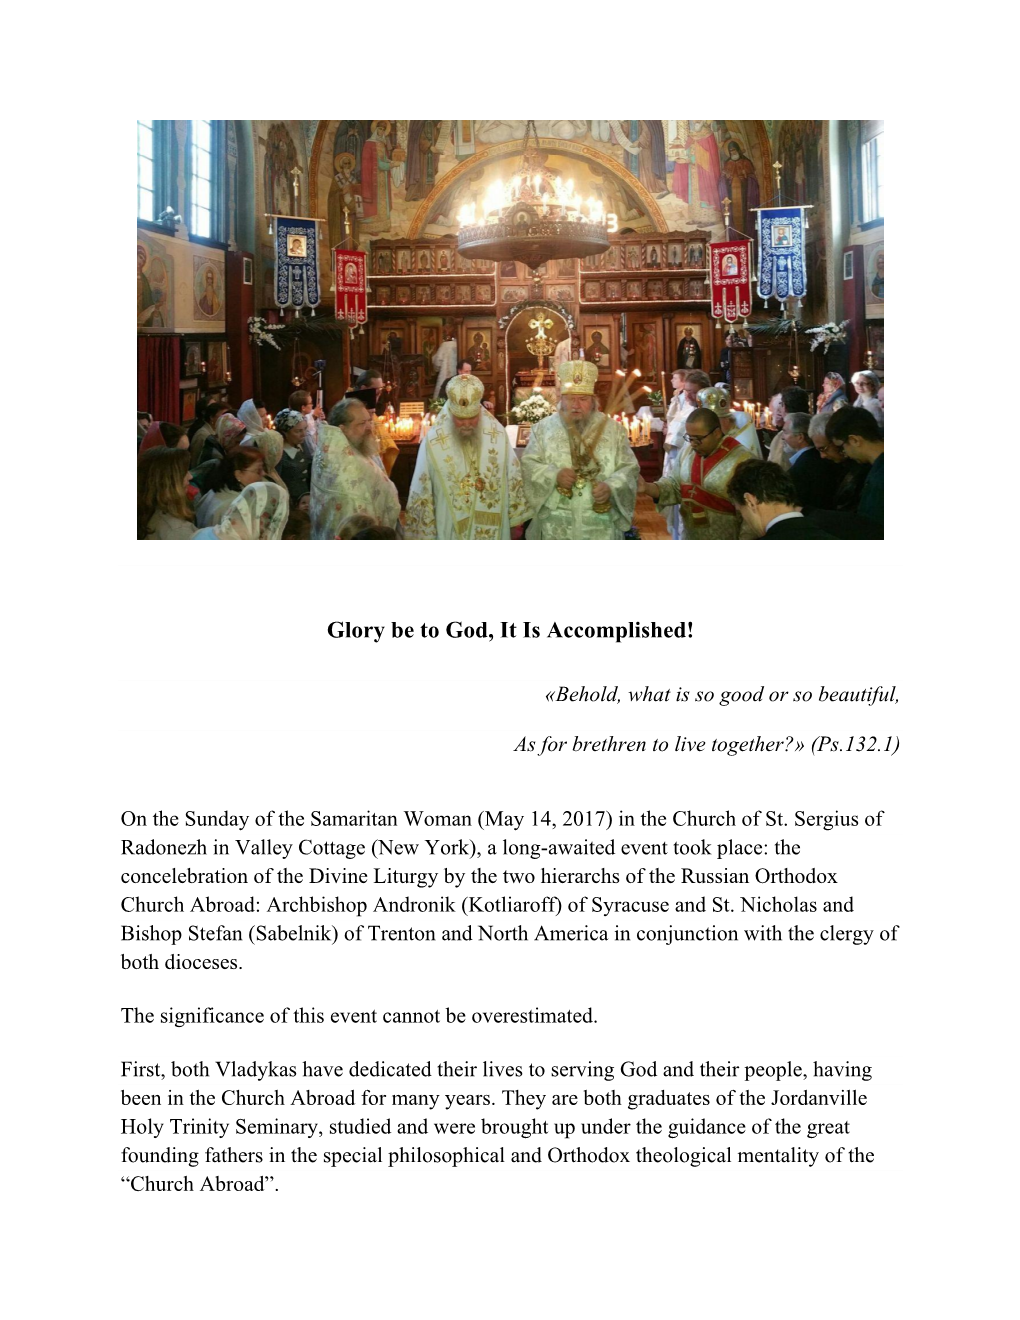 On the Liturgical Concelebration